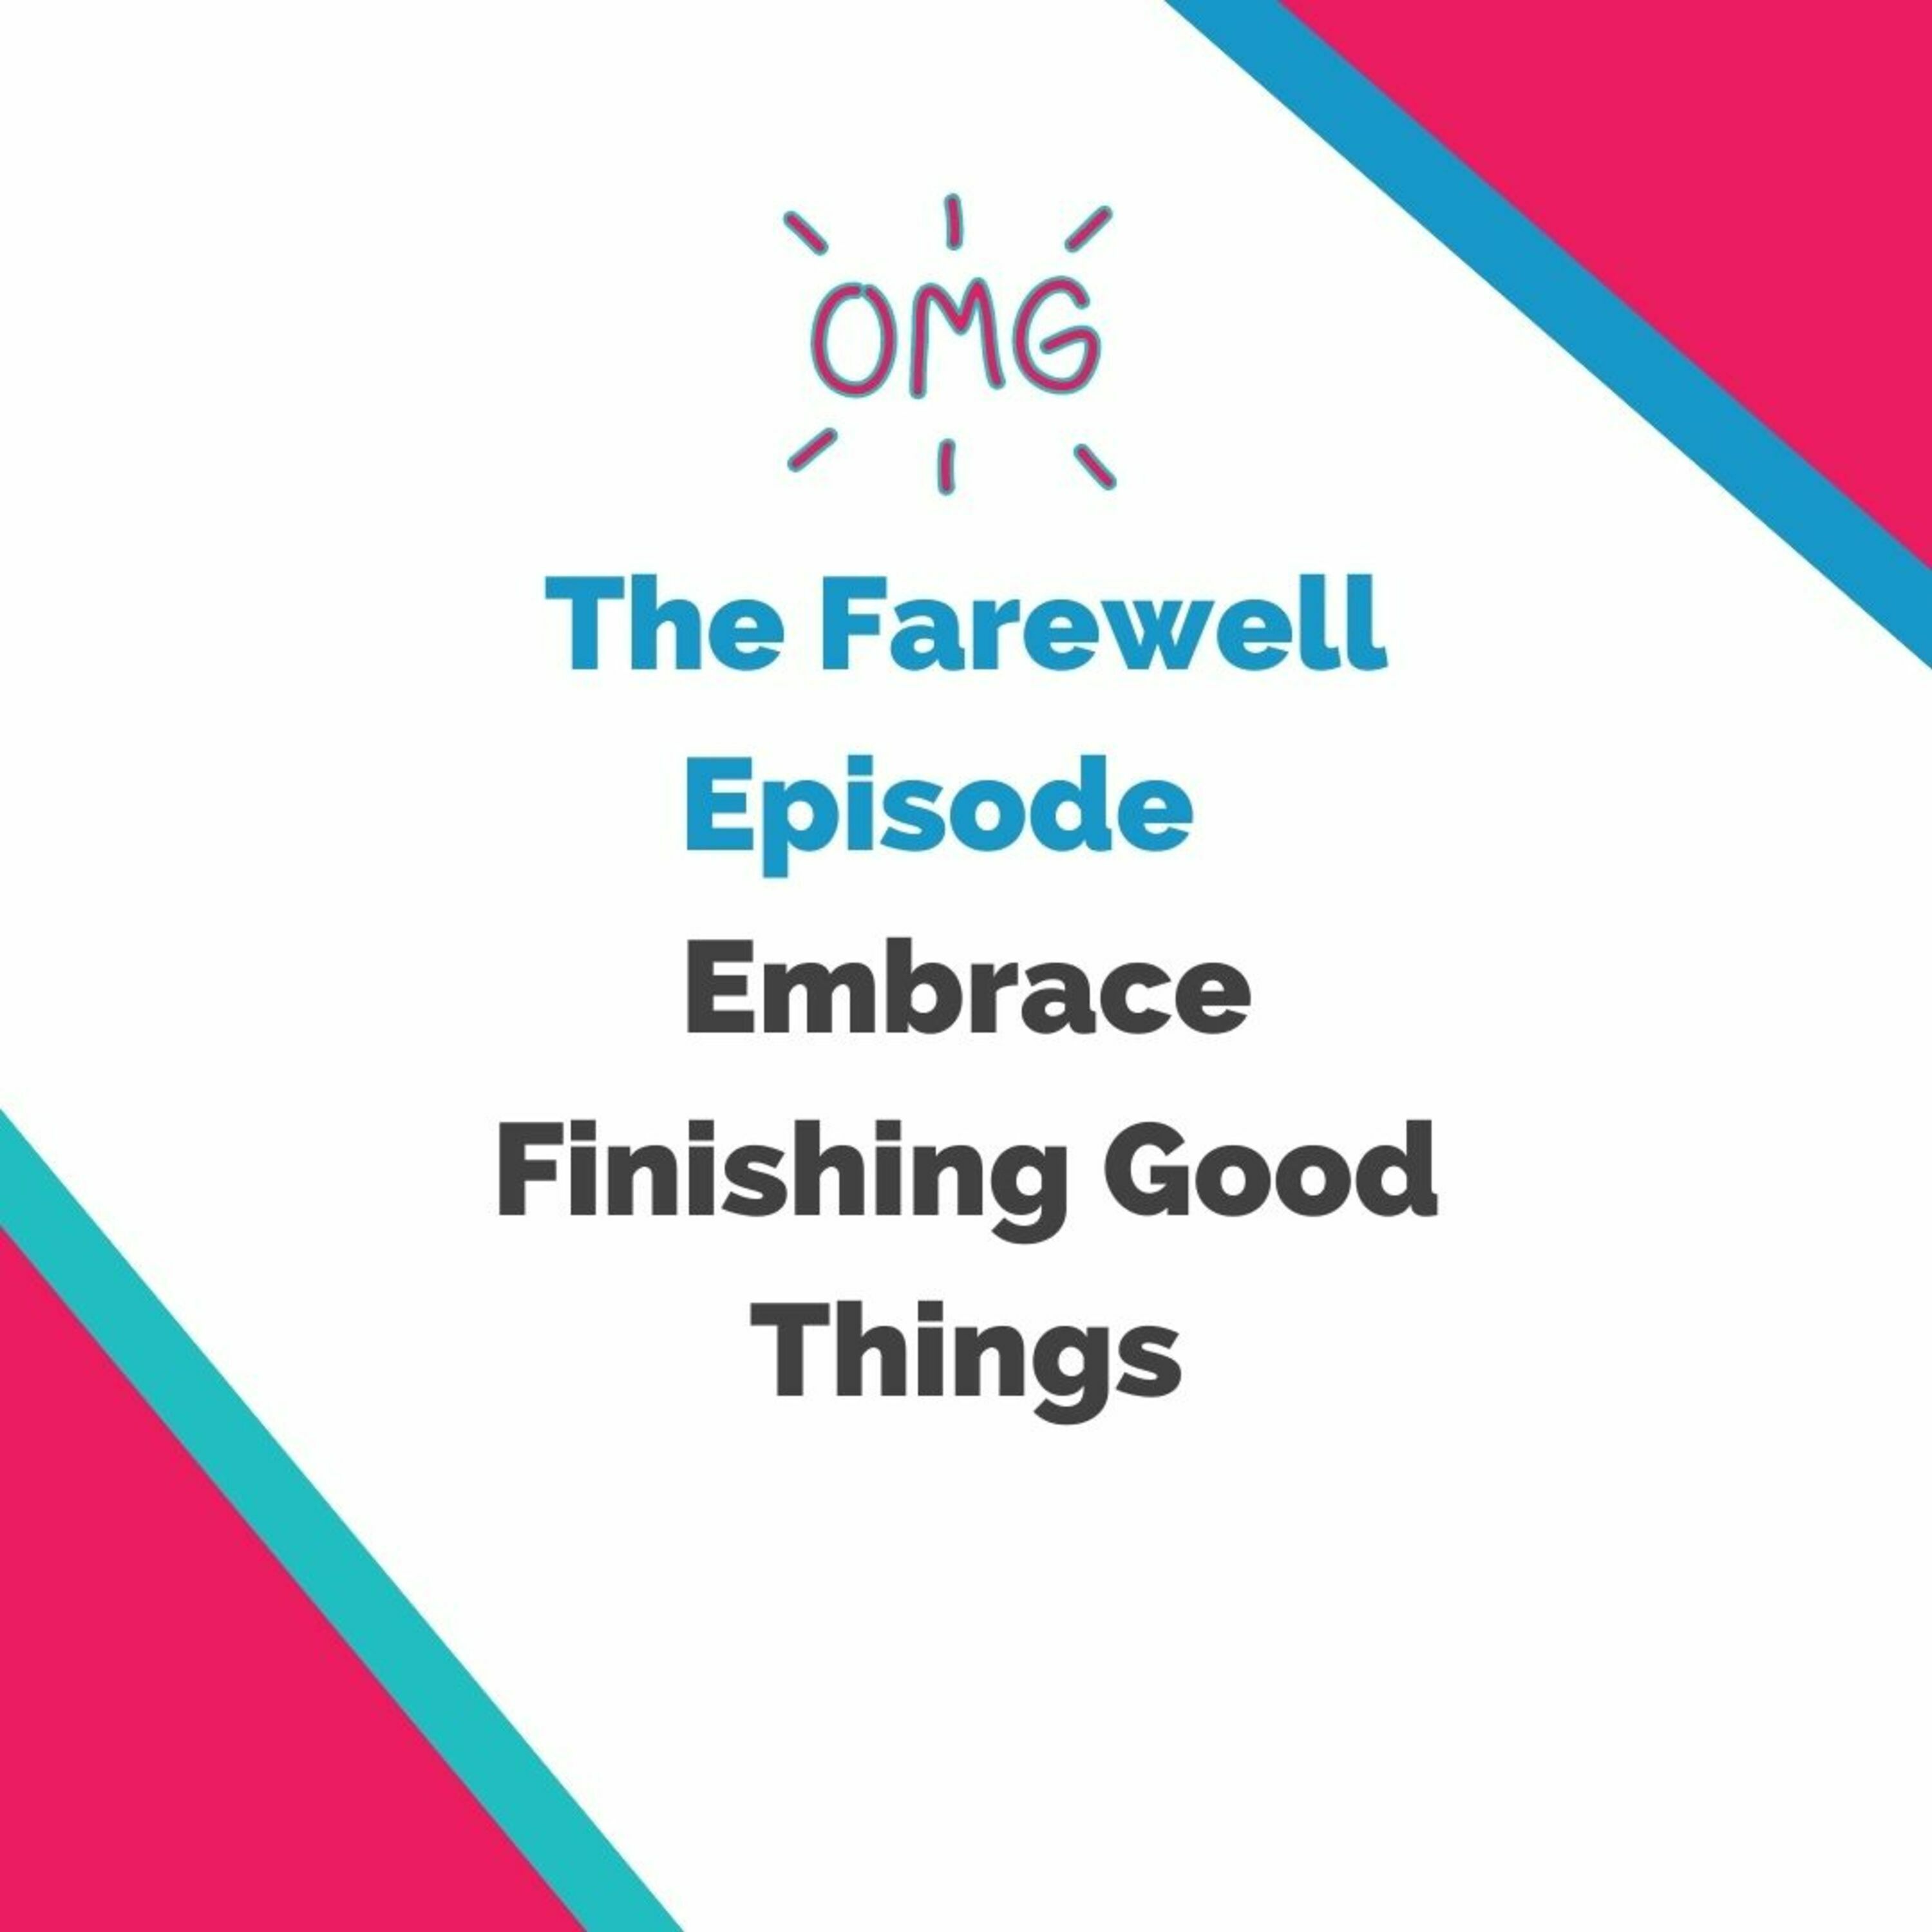 The Farewell Episode: The Joy of Finishing Good Things